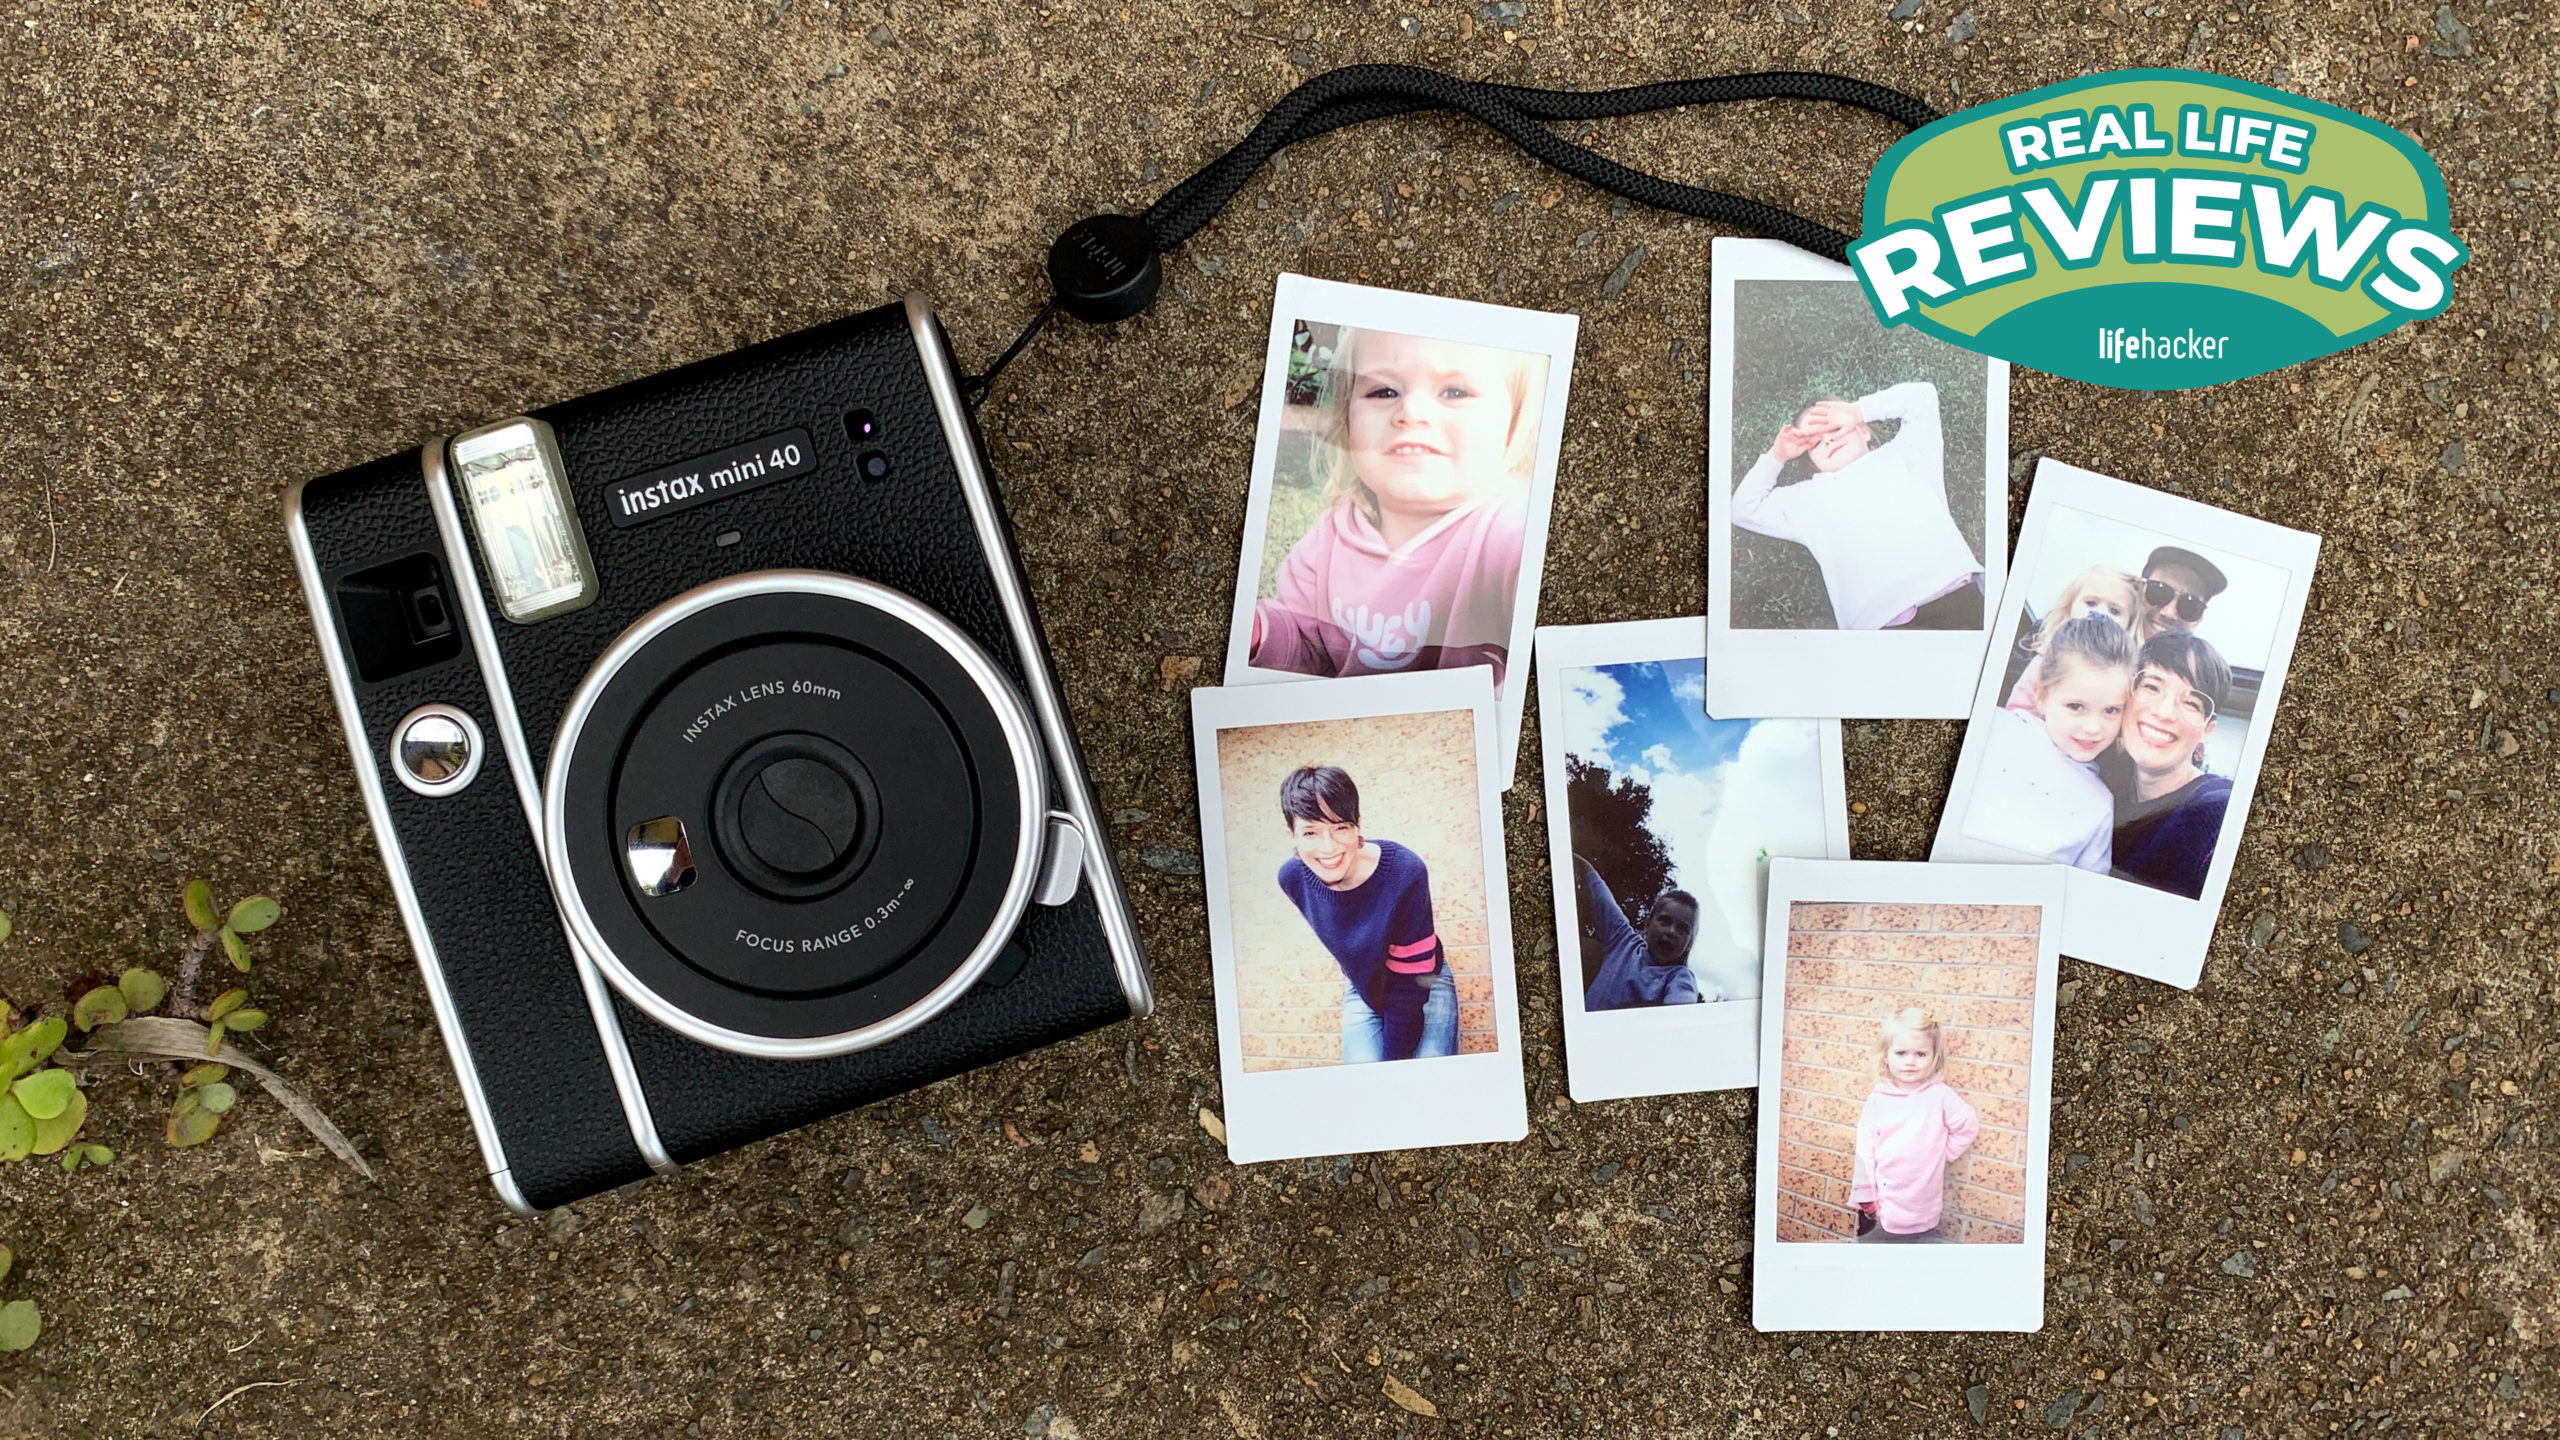 media Converteren struik The Instax Mini 40 Doesn't Look like a Toy but It's Still Child's Play